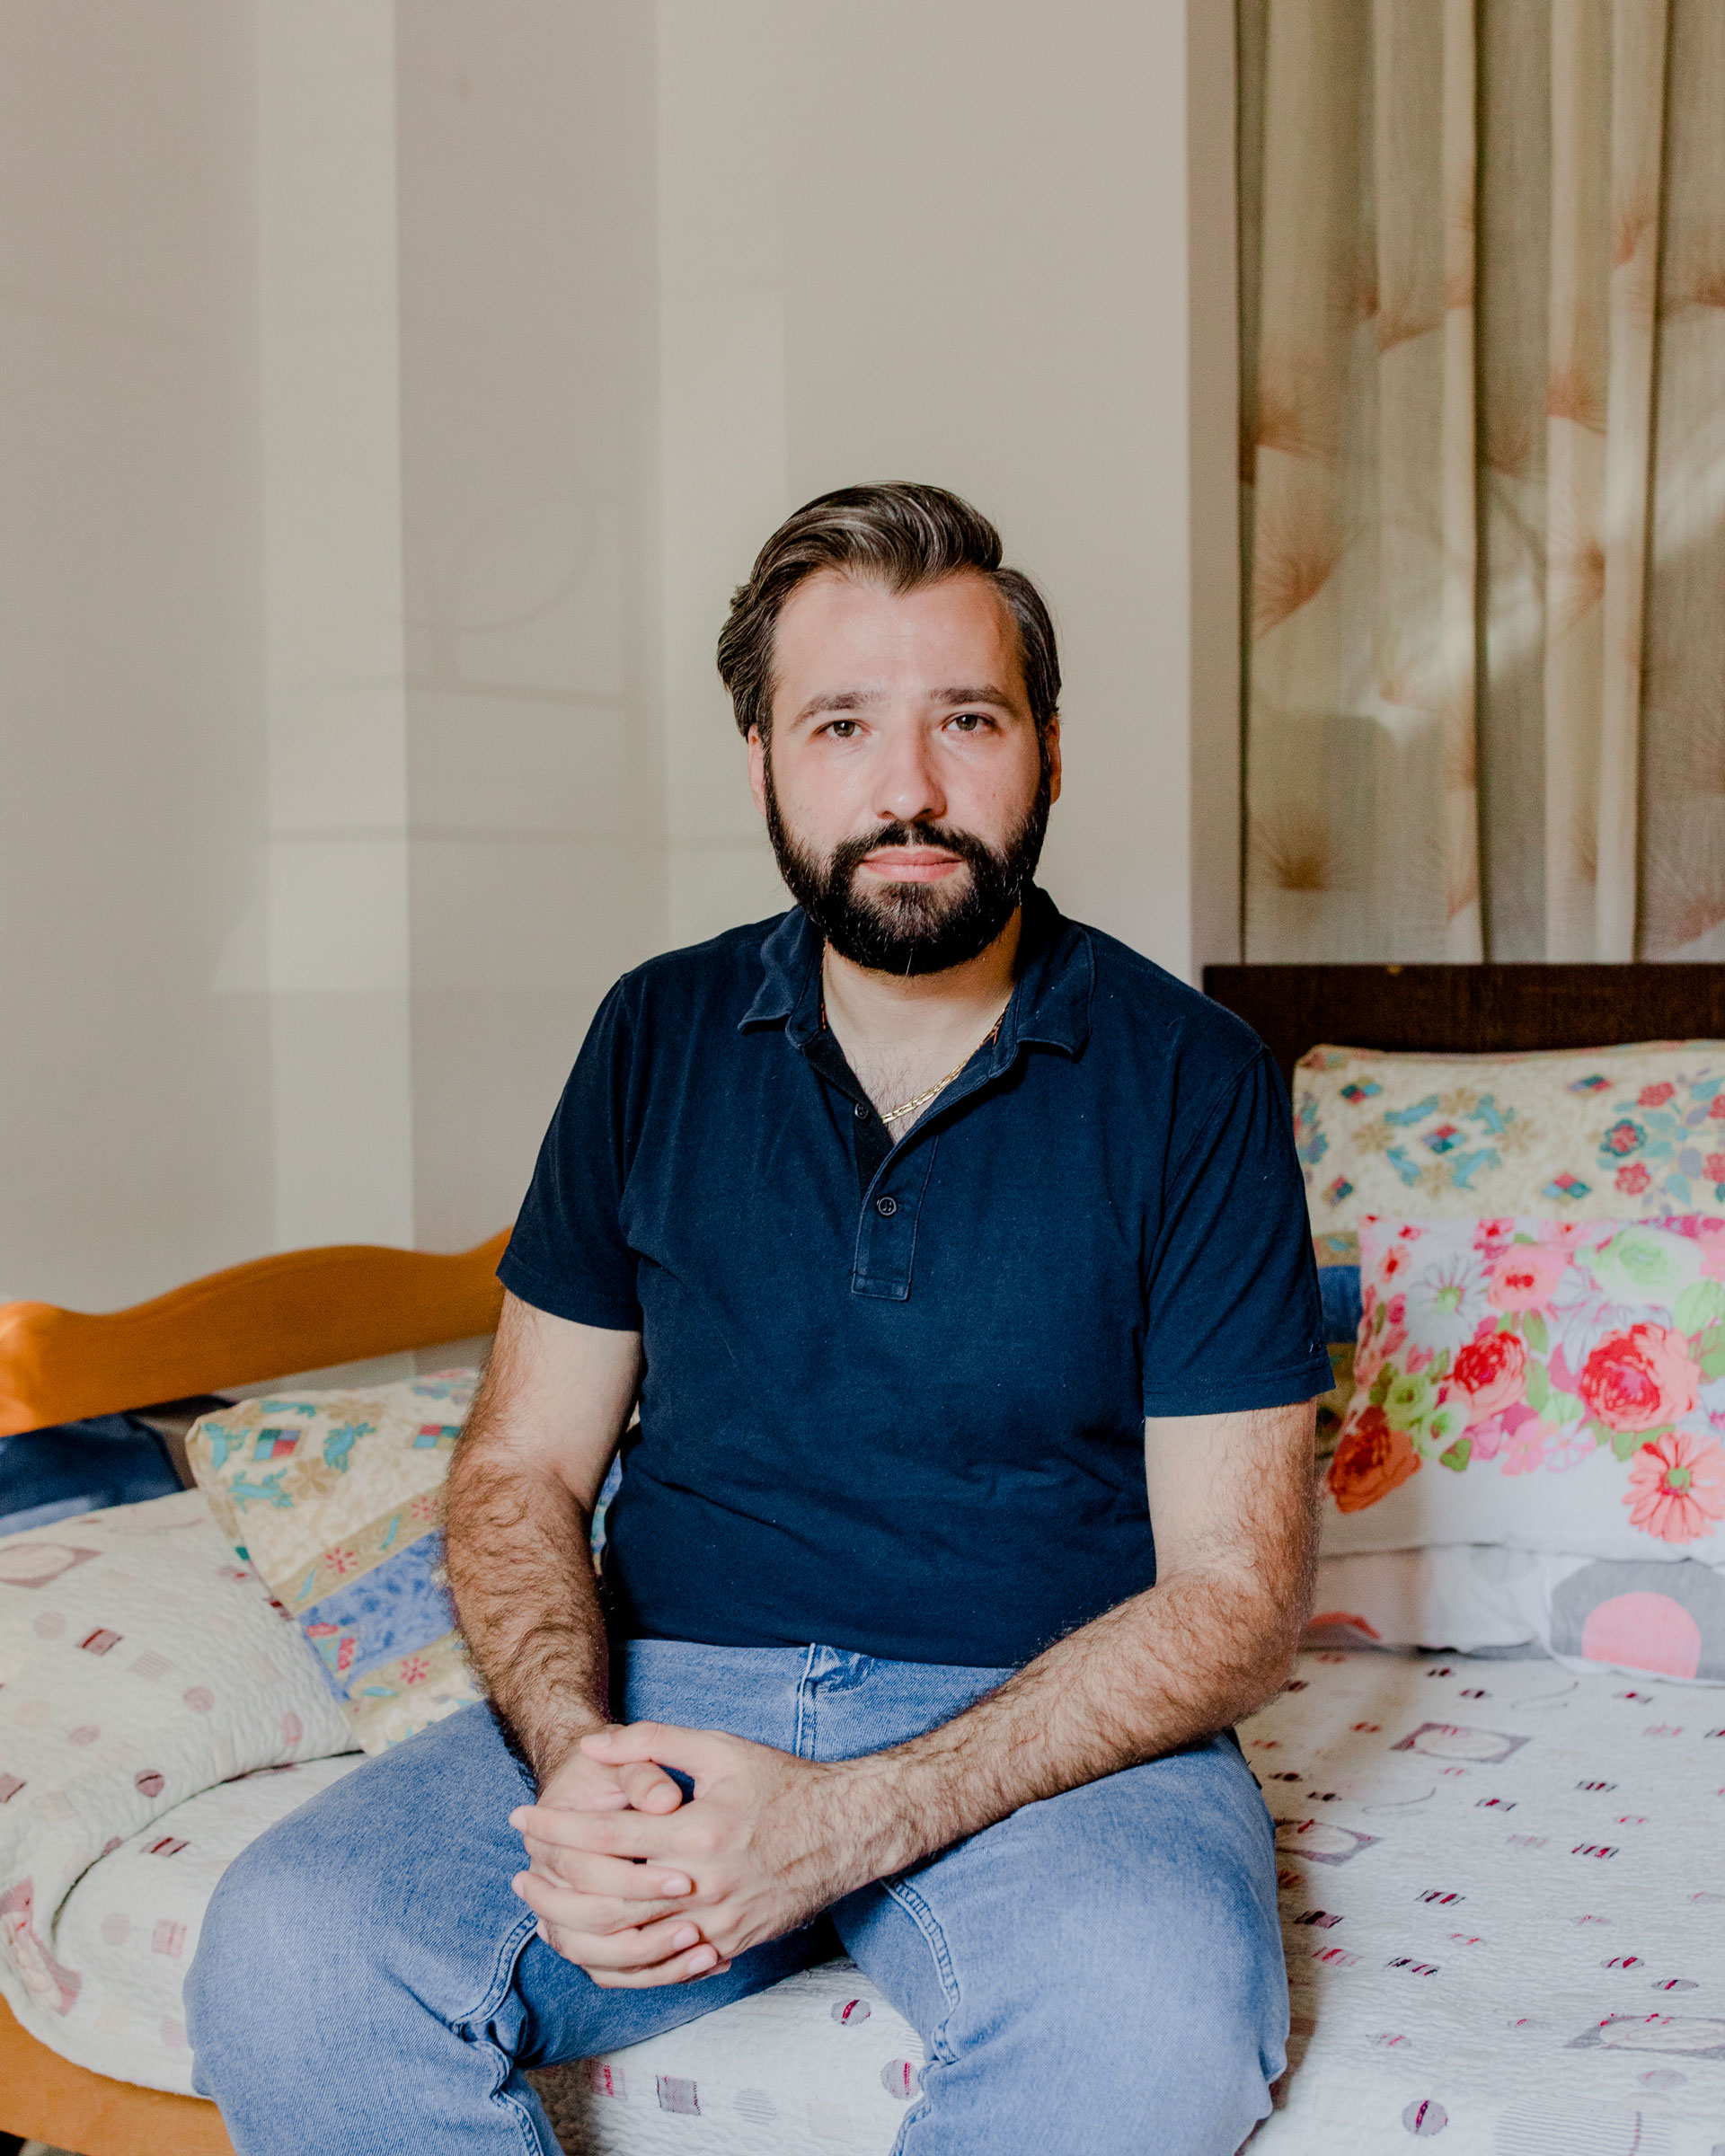 Elie Hasrouty at home in Sin El Fil on July 20. This used to be his father's bed, but Elie started sleeping in it after his father passed away in the August 2020 explosion